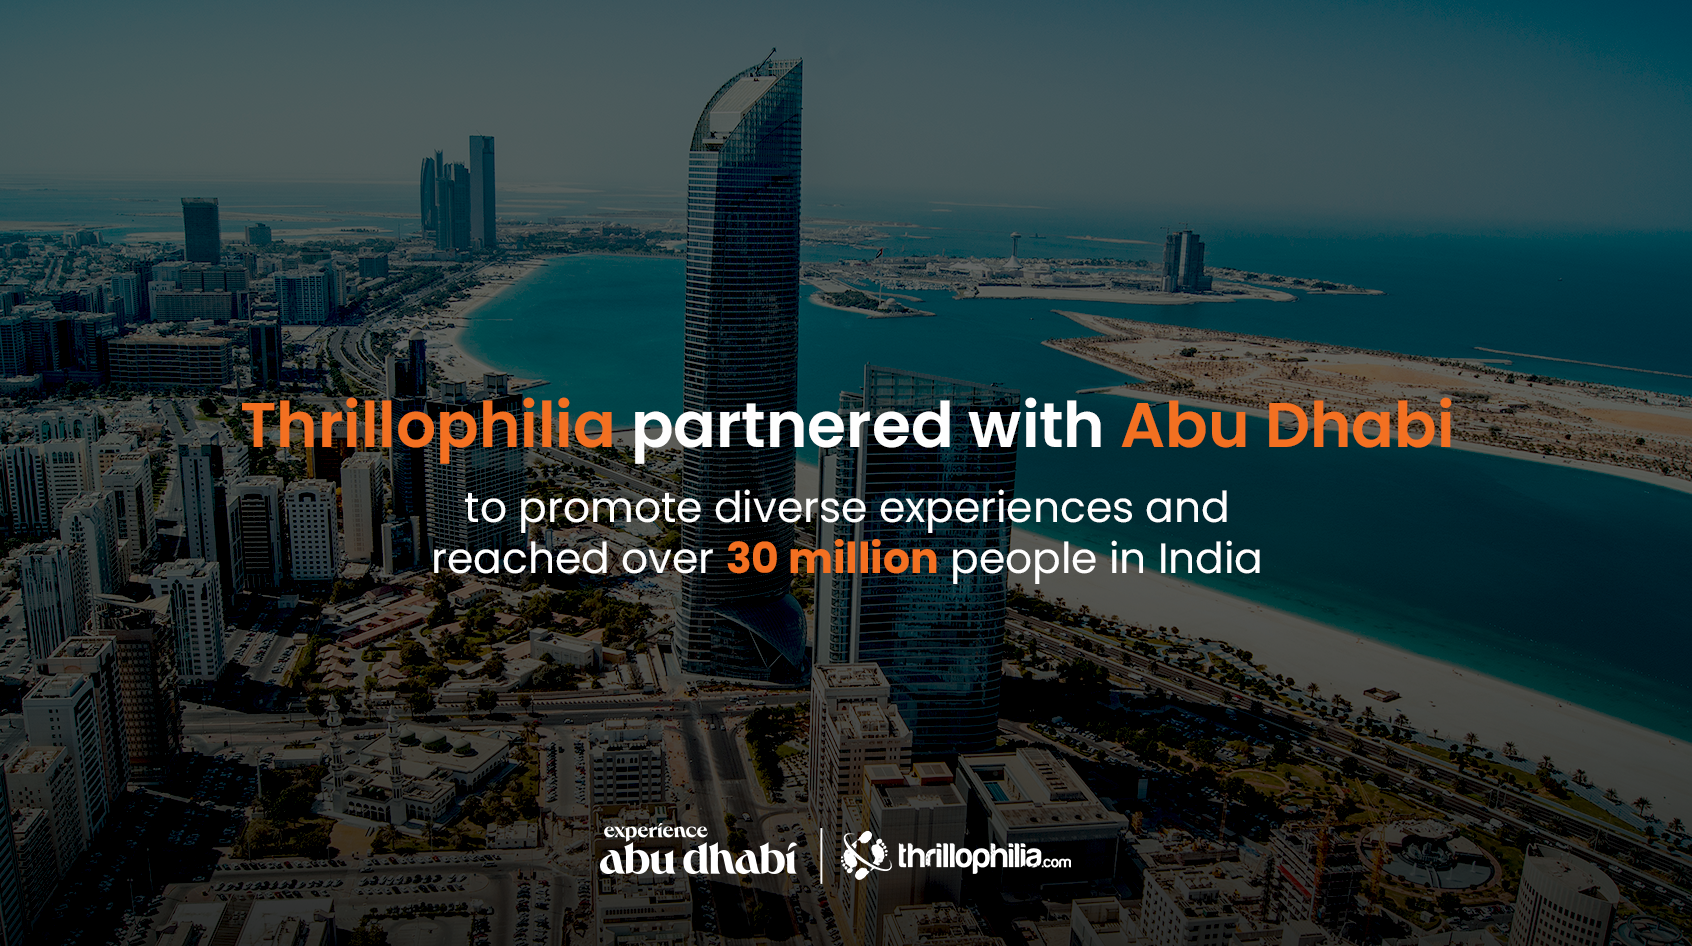 Thrillophilia partnered with Abu Dhabi to promote diverse experiences and reached over 30 million people in India